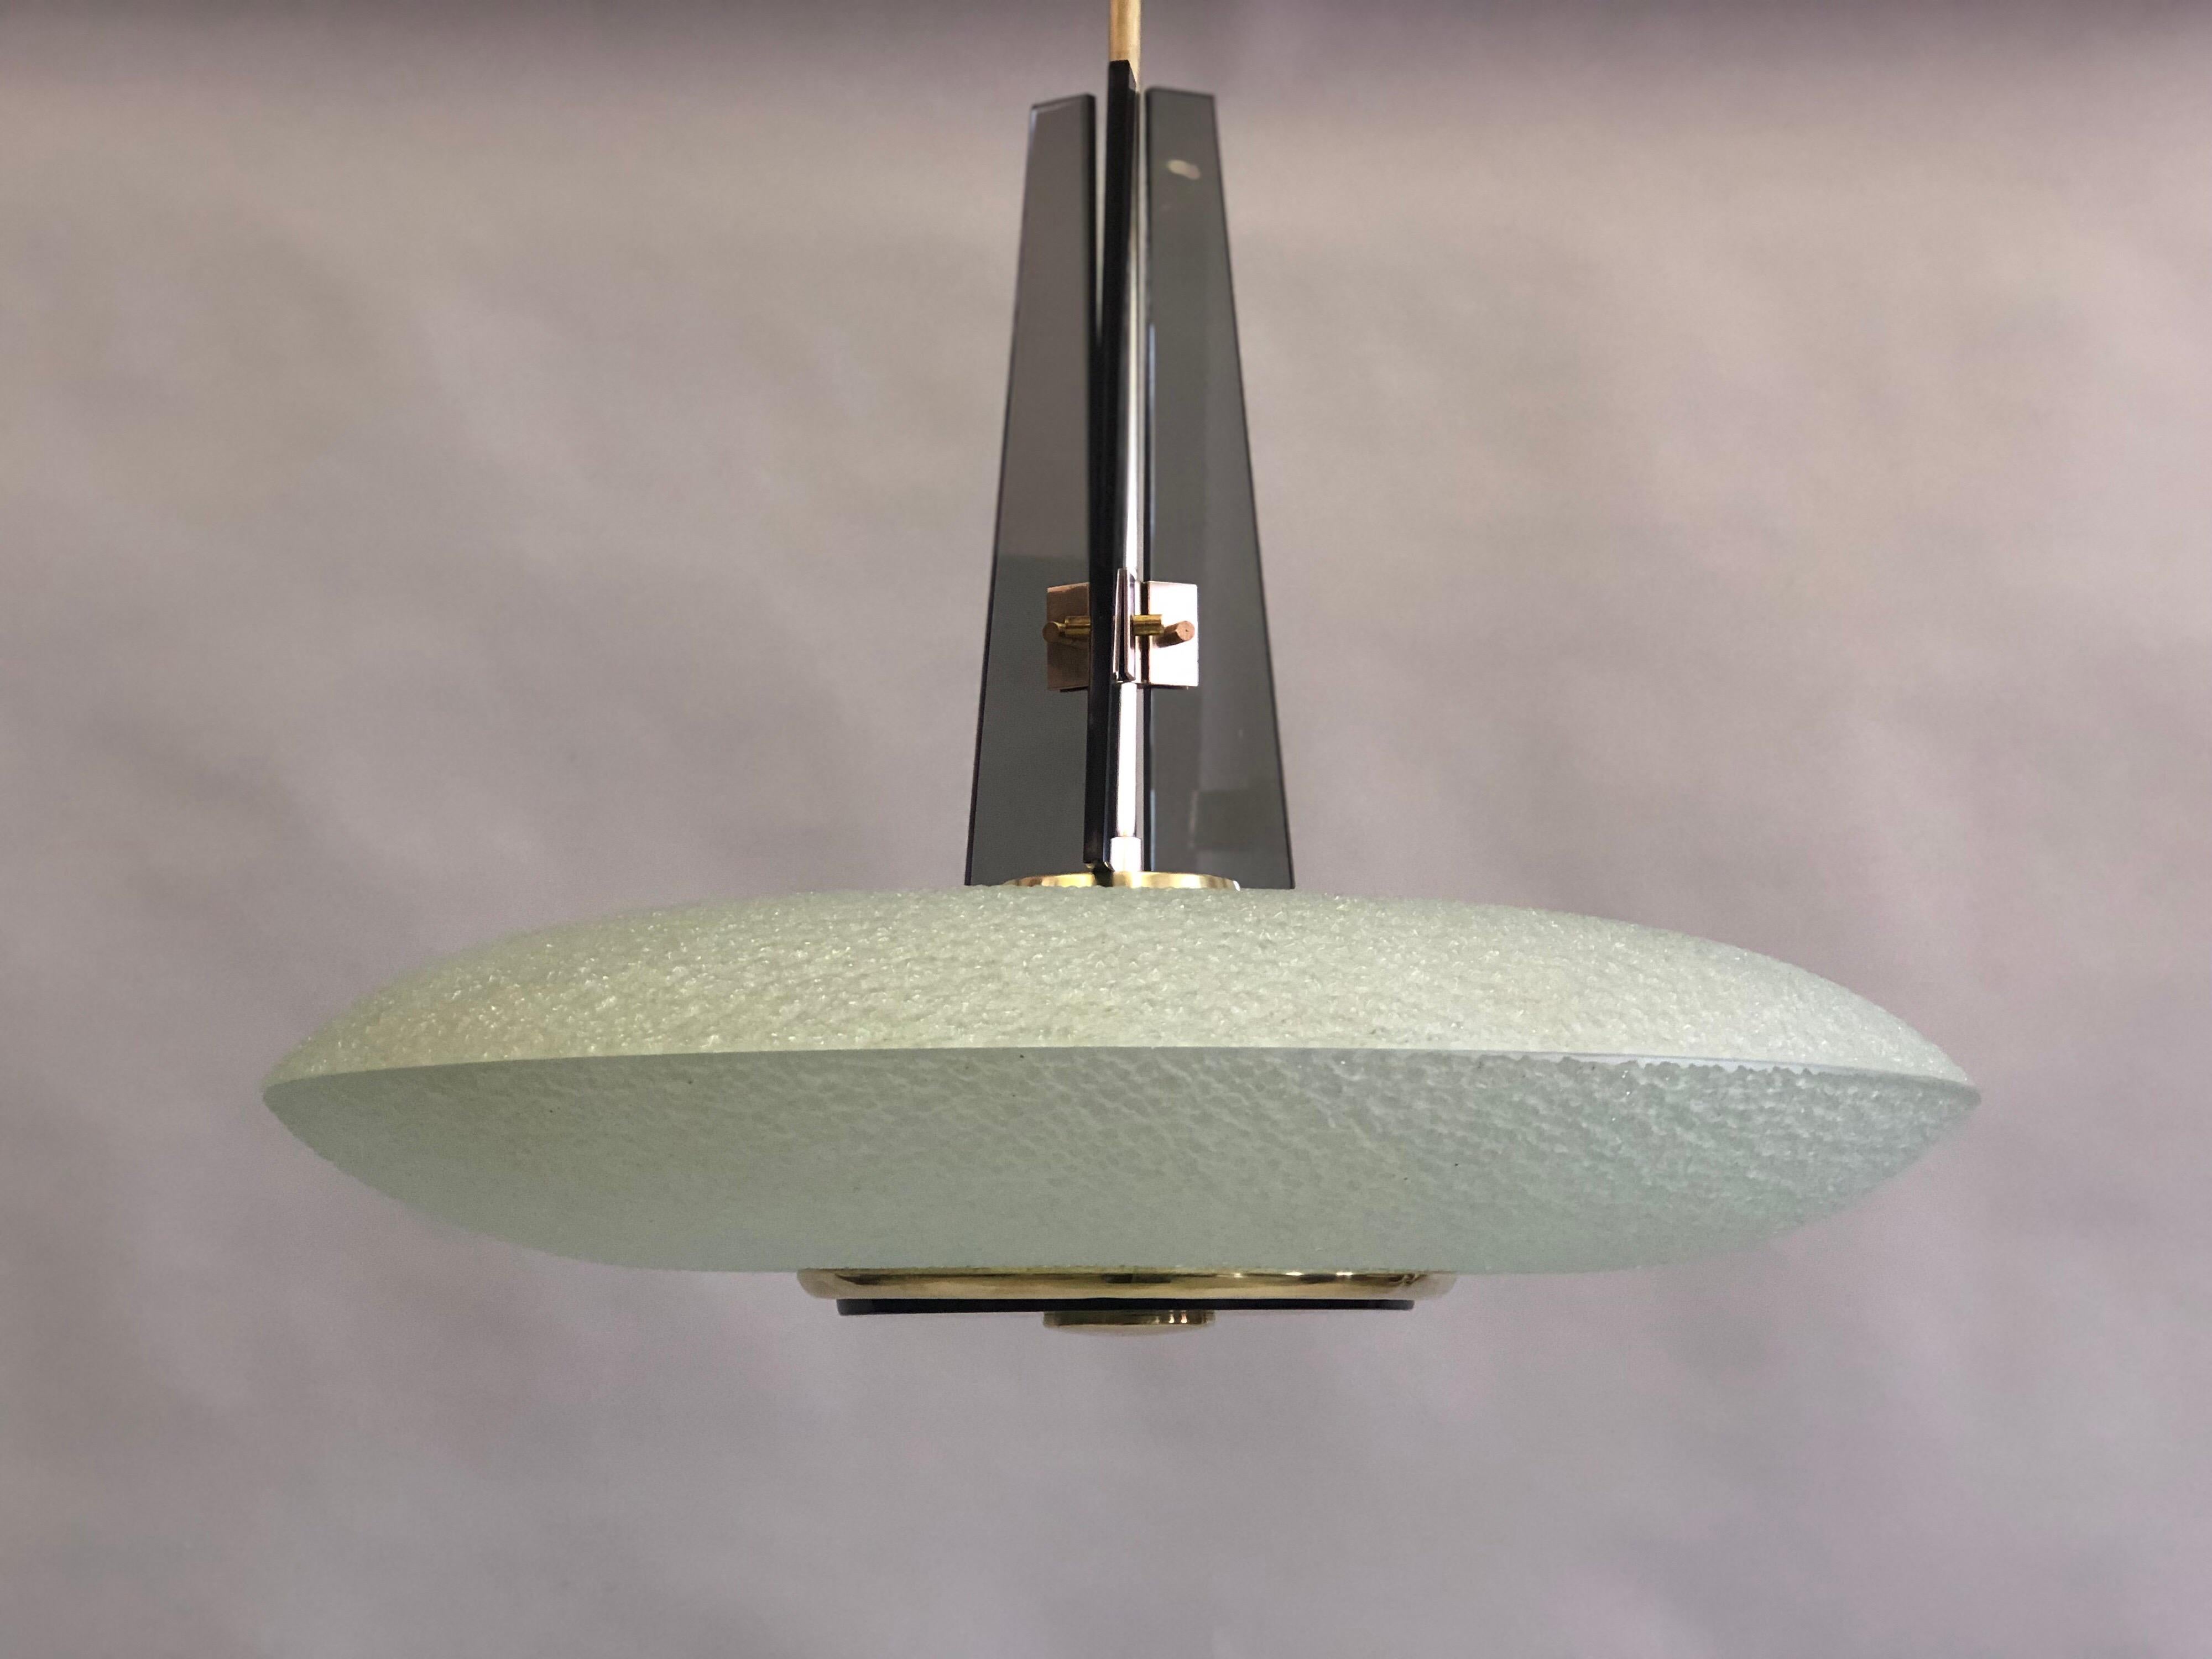 Rare Italian Mid-Century Modern chandelier / pendant / fixture by Max Ingrand for Fontana Arte in double saucer form with opaque, satin green glass in a textured pattern. A 3 part tapered grey glass finial with solid brass fittings completes the